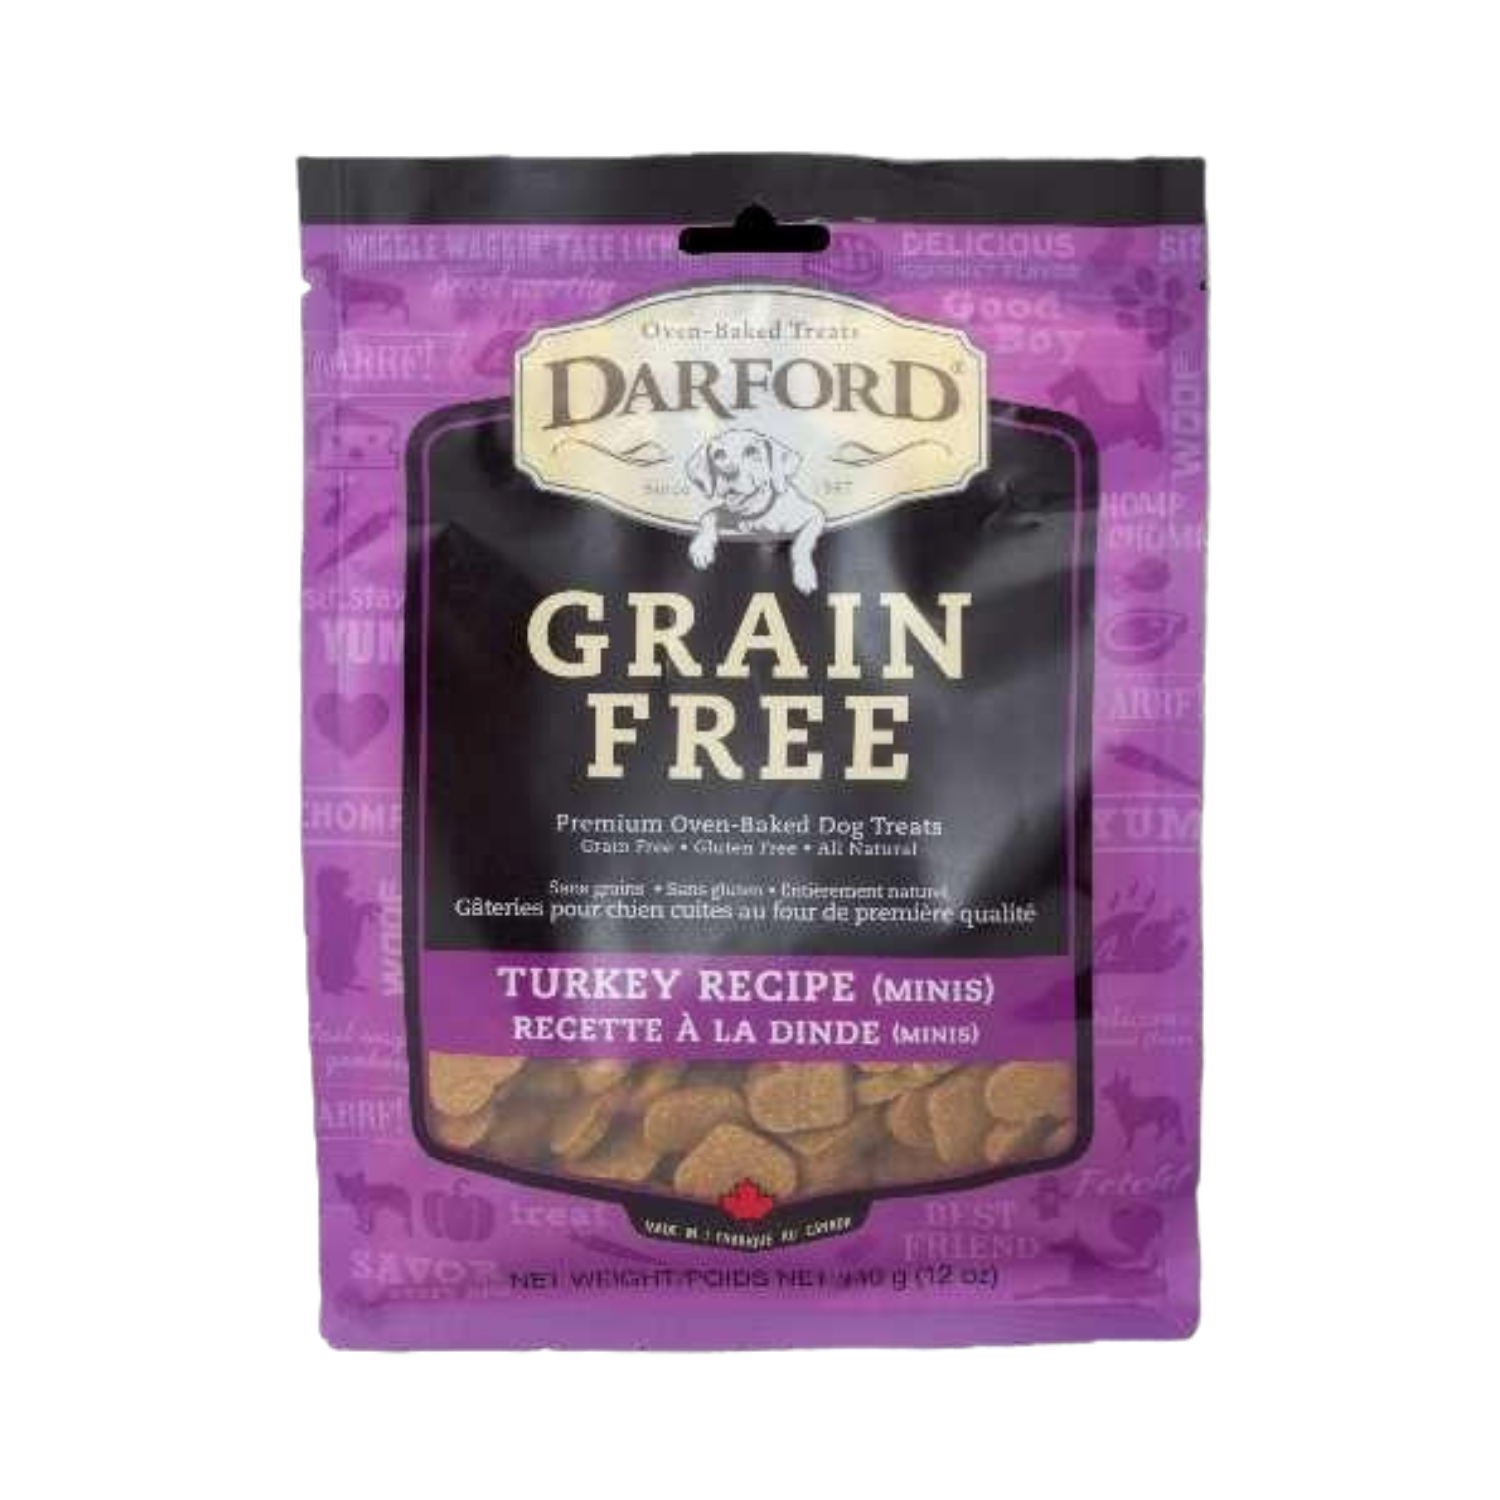 [DISCONTINUED] Darford Grain Free (Turkey) for Dogs - 340g